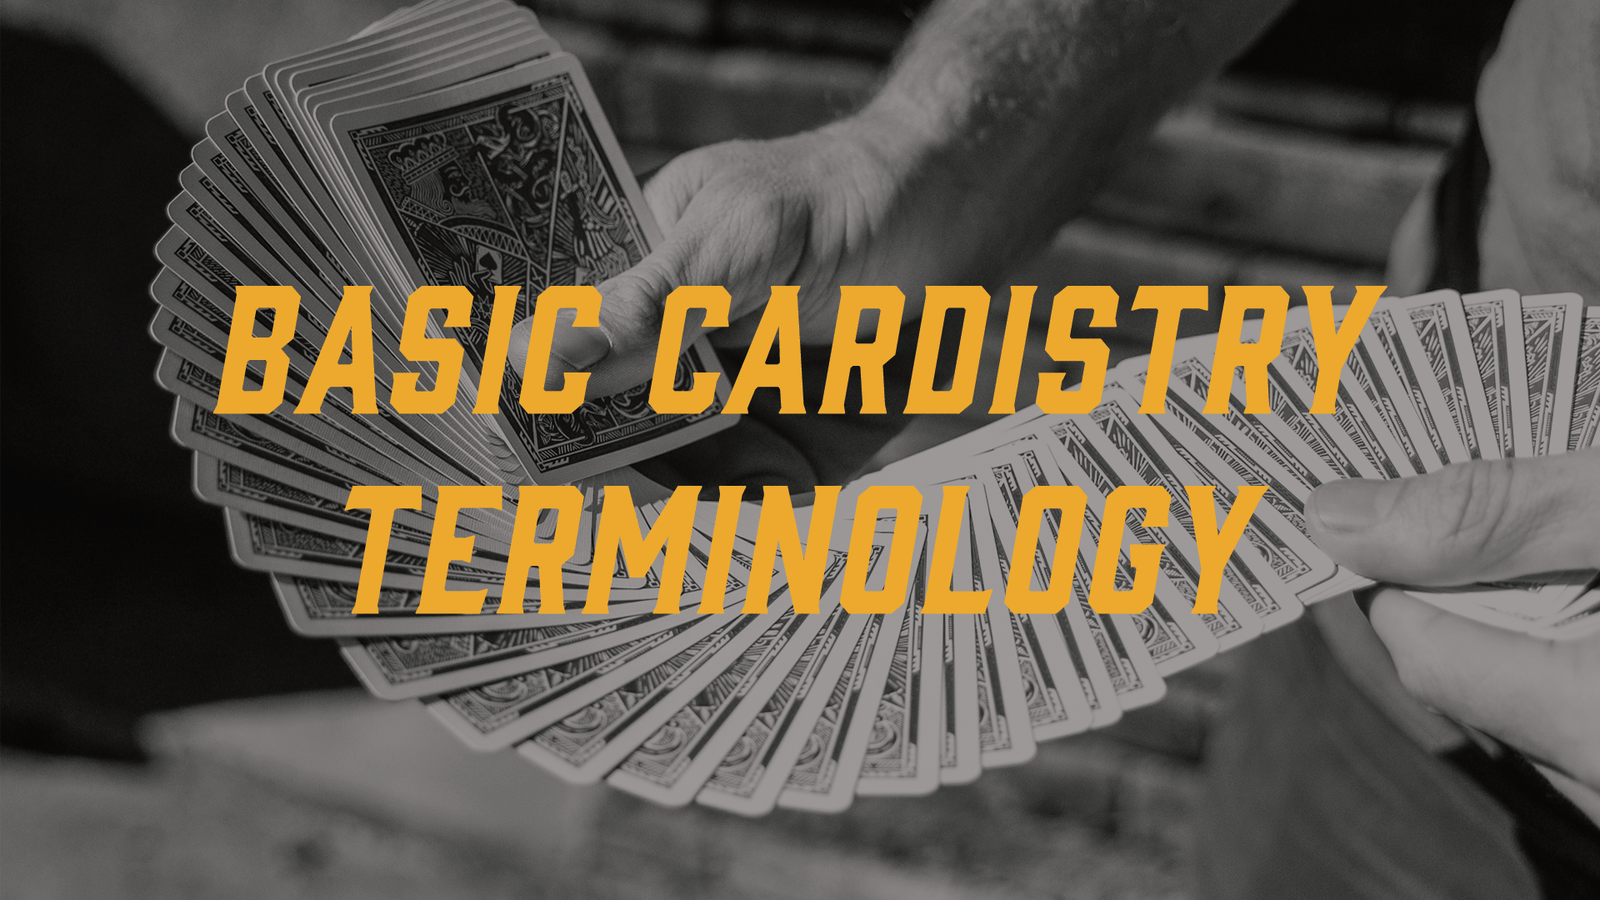 Cardistry 101: Essential Terms Every Beginner Should Know